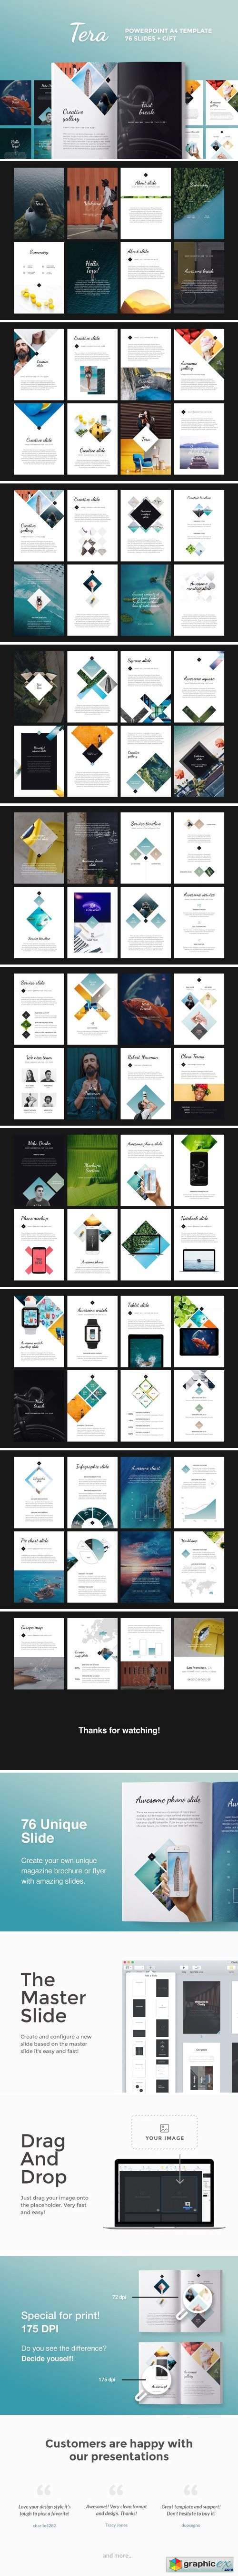 A4 | Tera PowerPoint Template